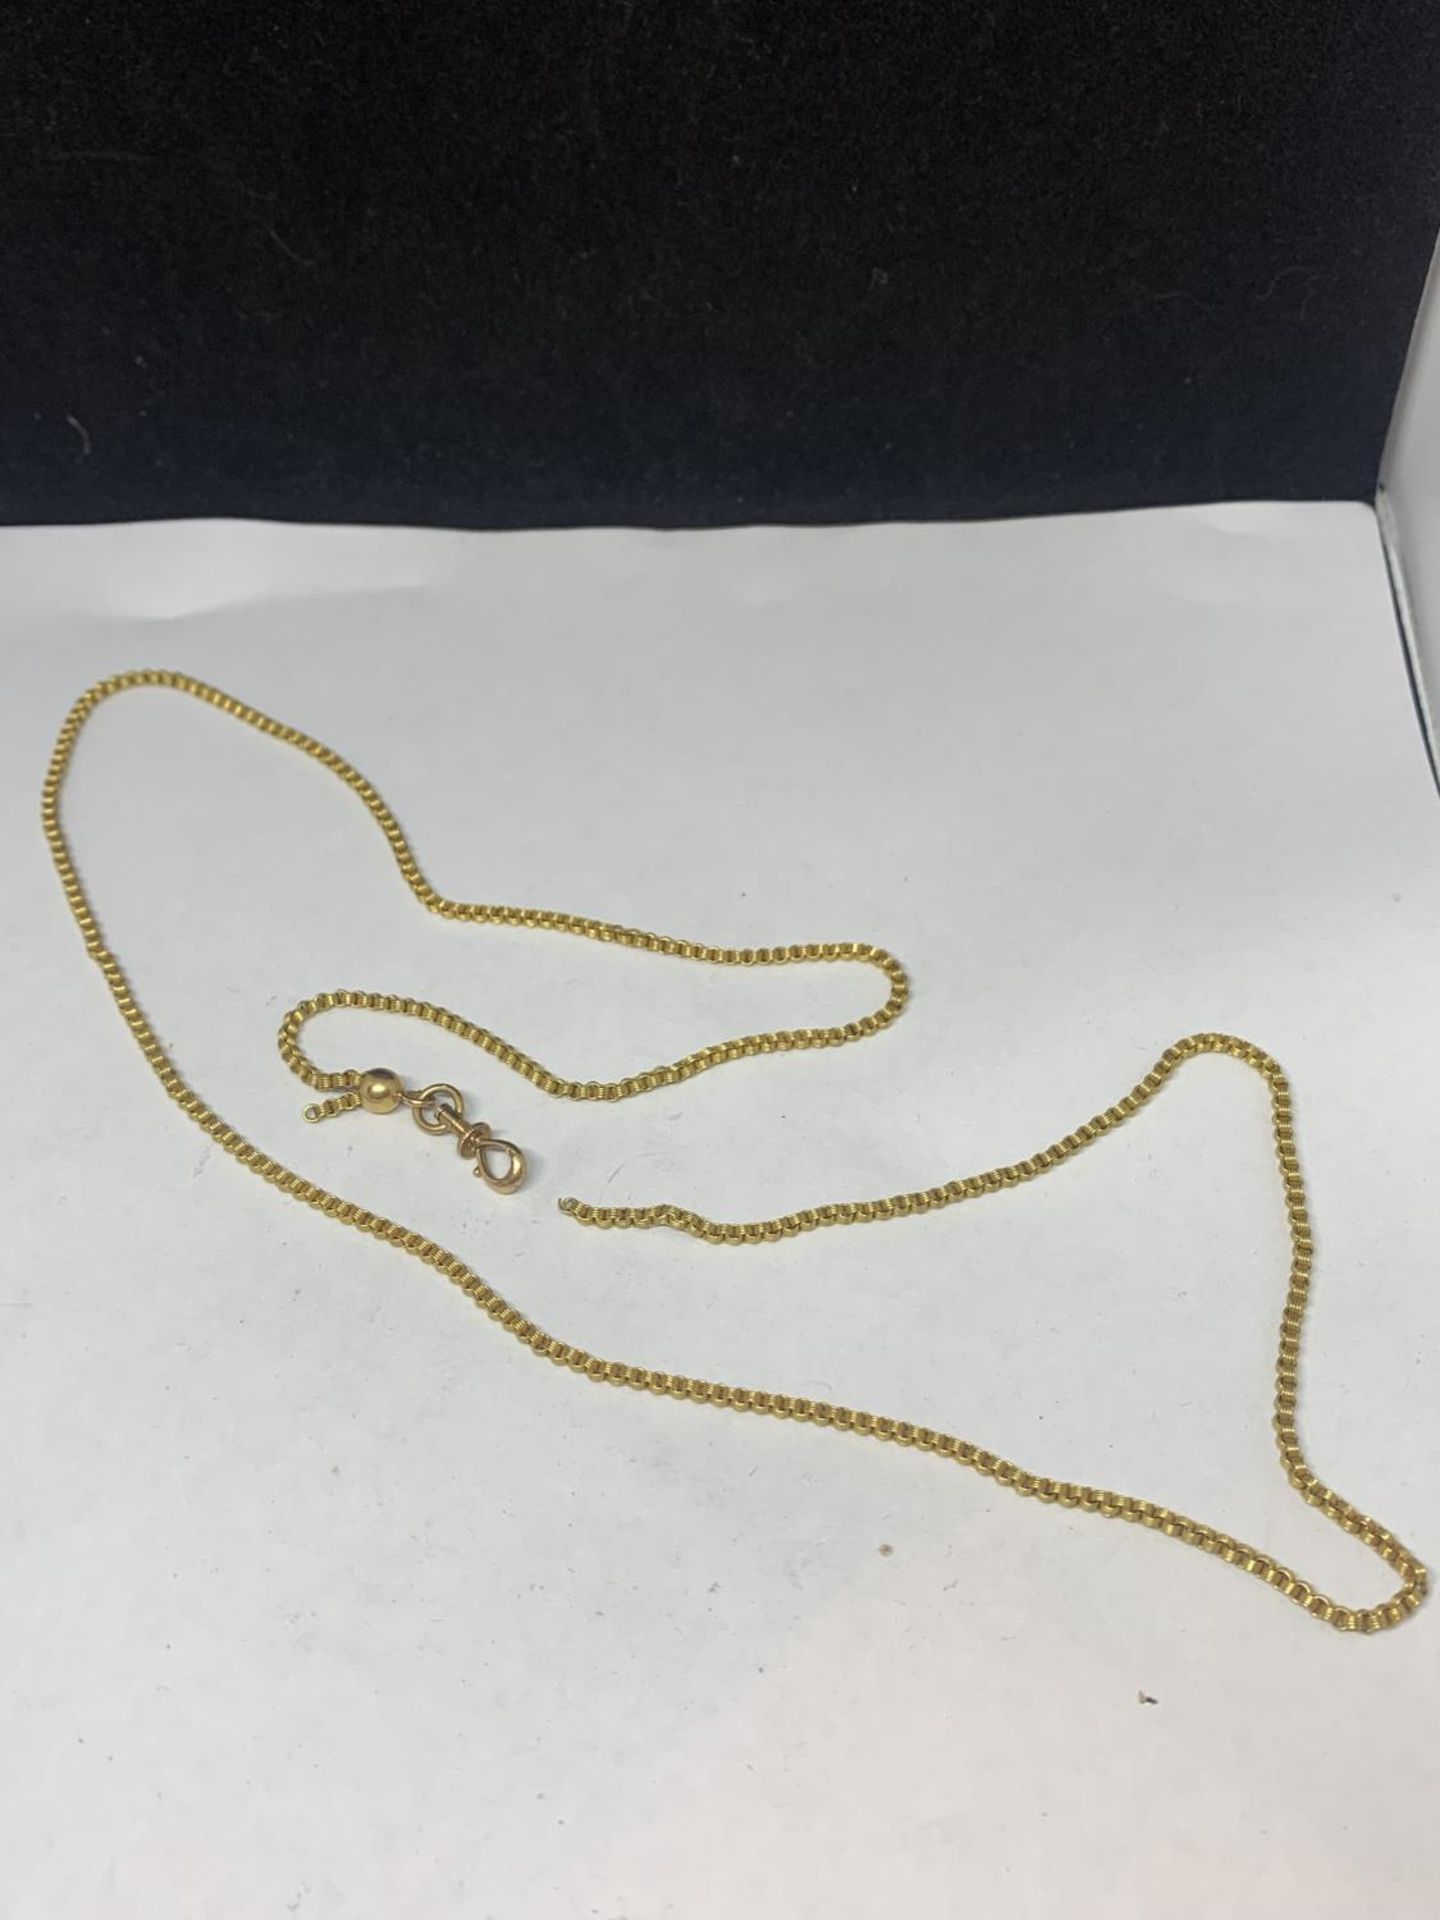 A TESTED TO 18 CARAT GOLD CHAIN GROSS WEIGHT 14.7 GRAMS